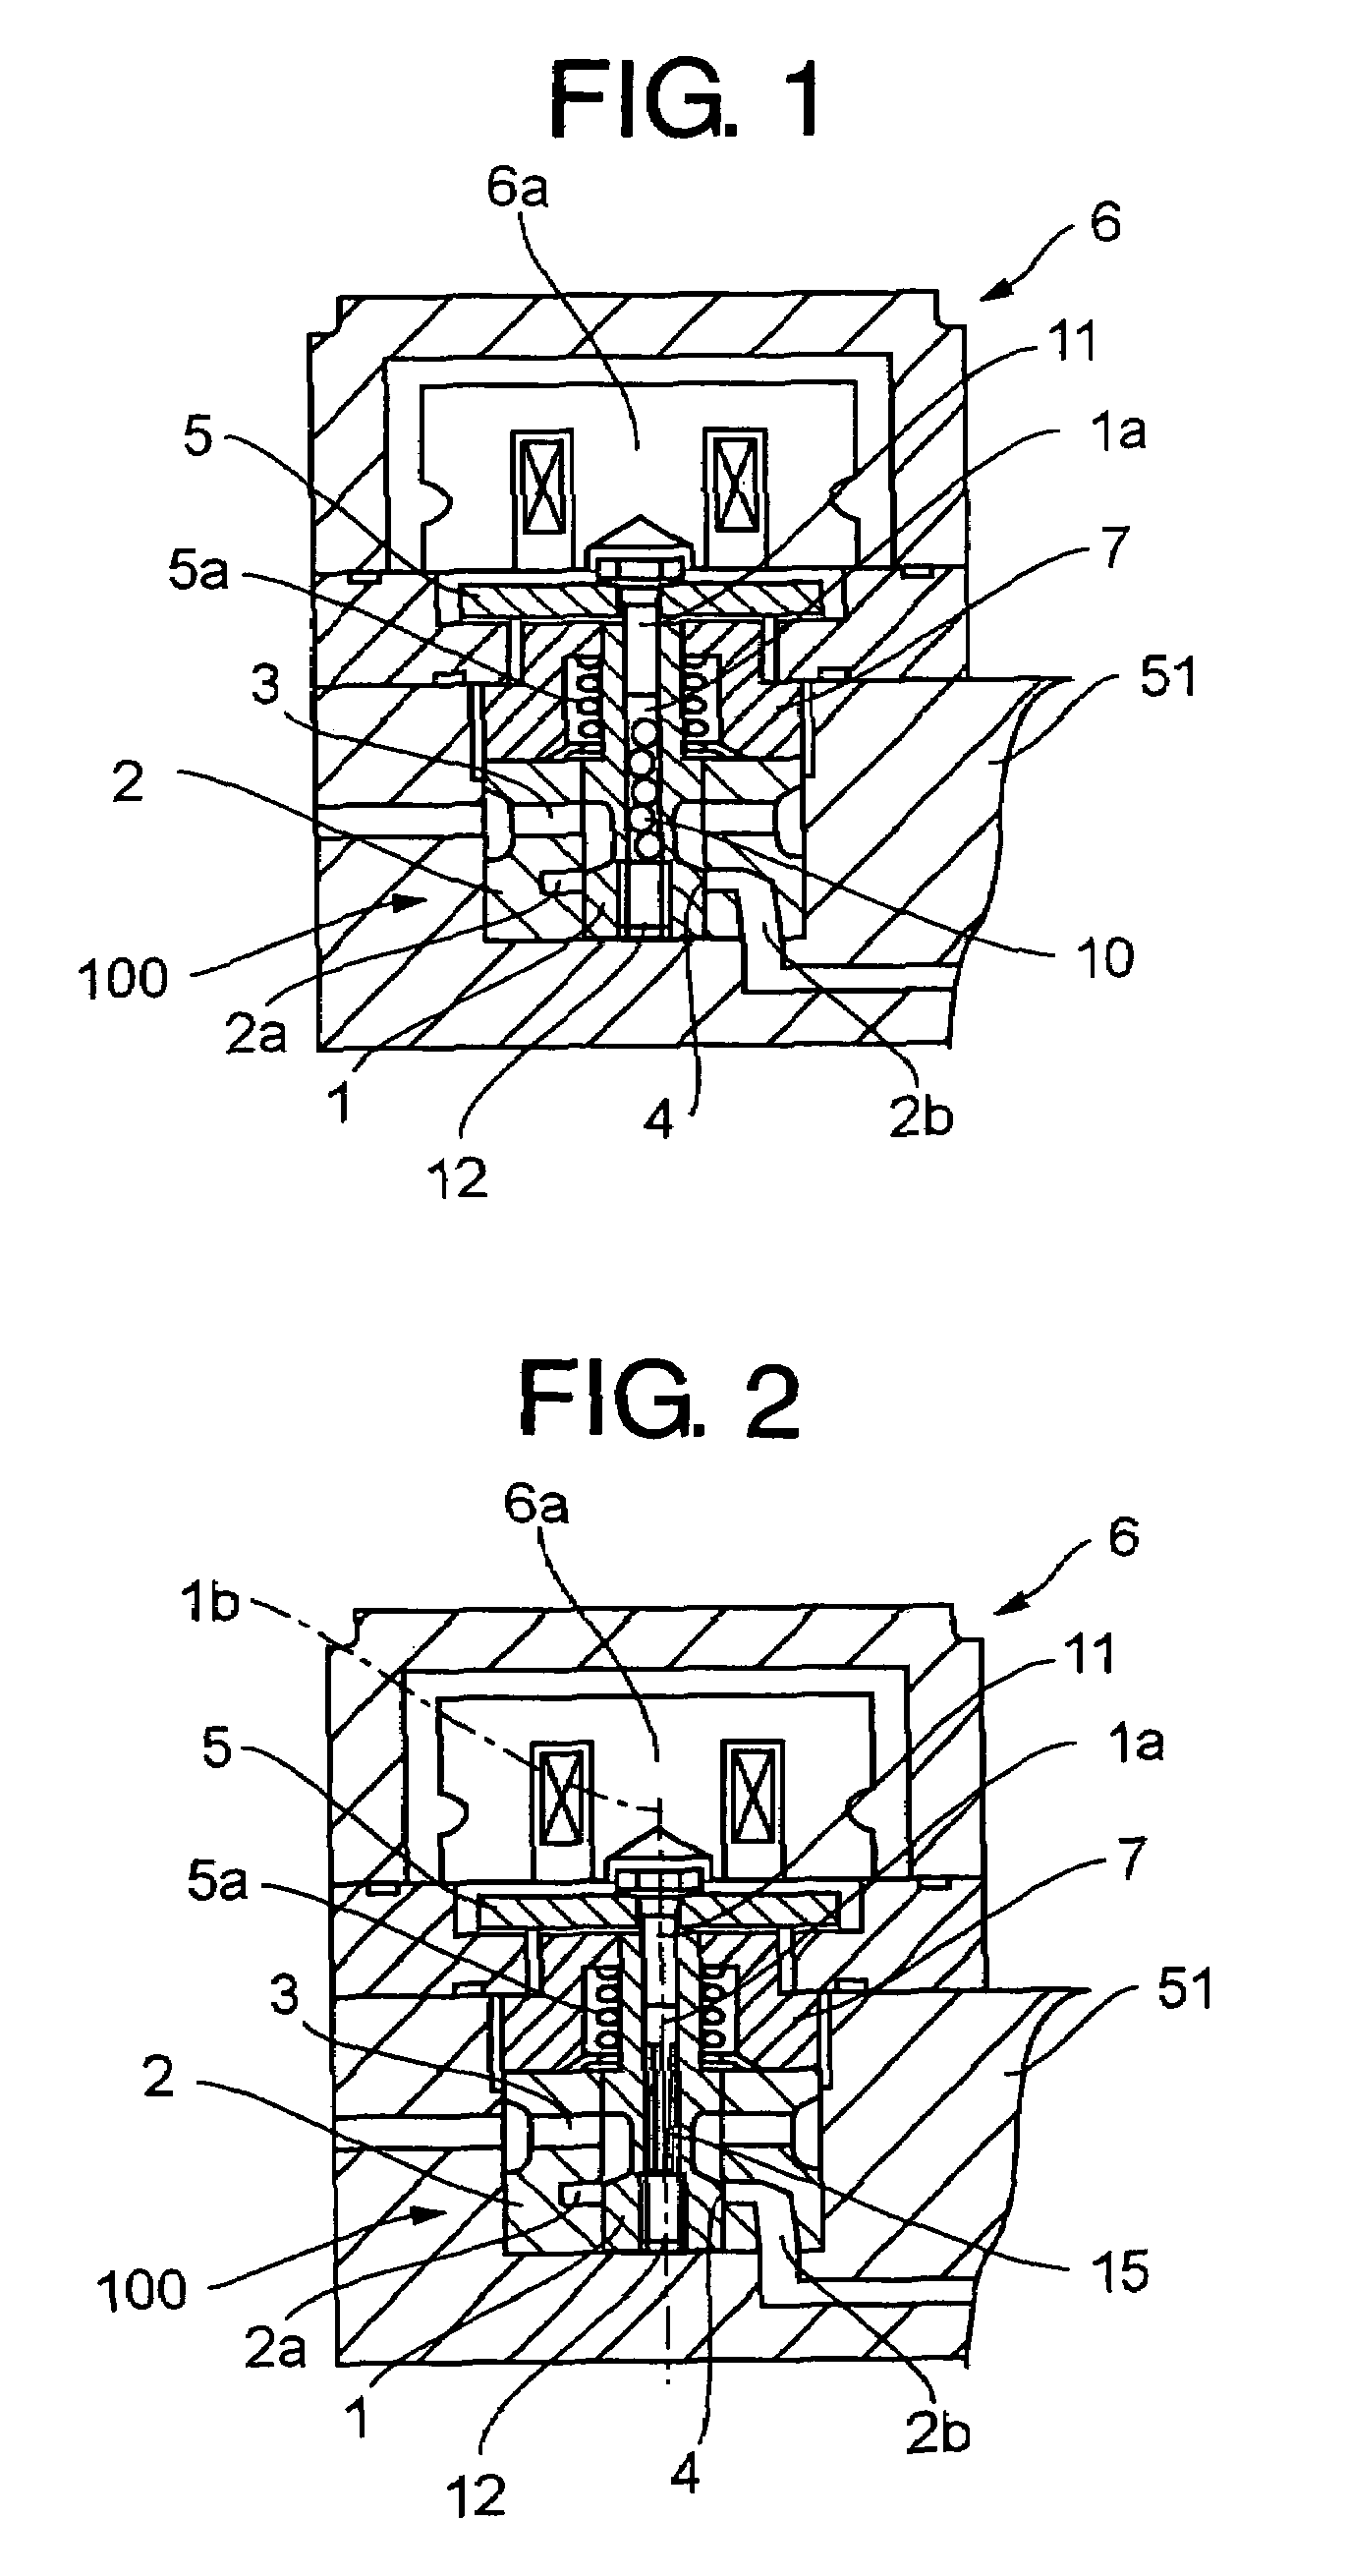 Electromagnetic controlled fuel injection apparatus with poppet valve